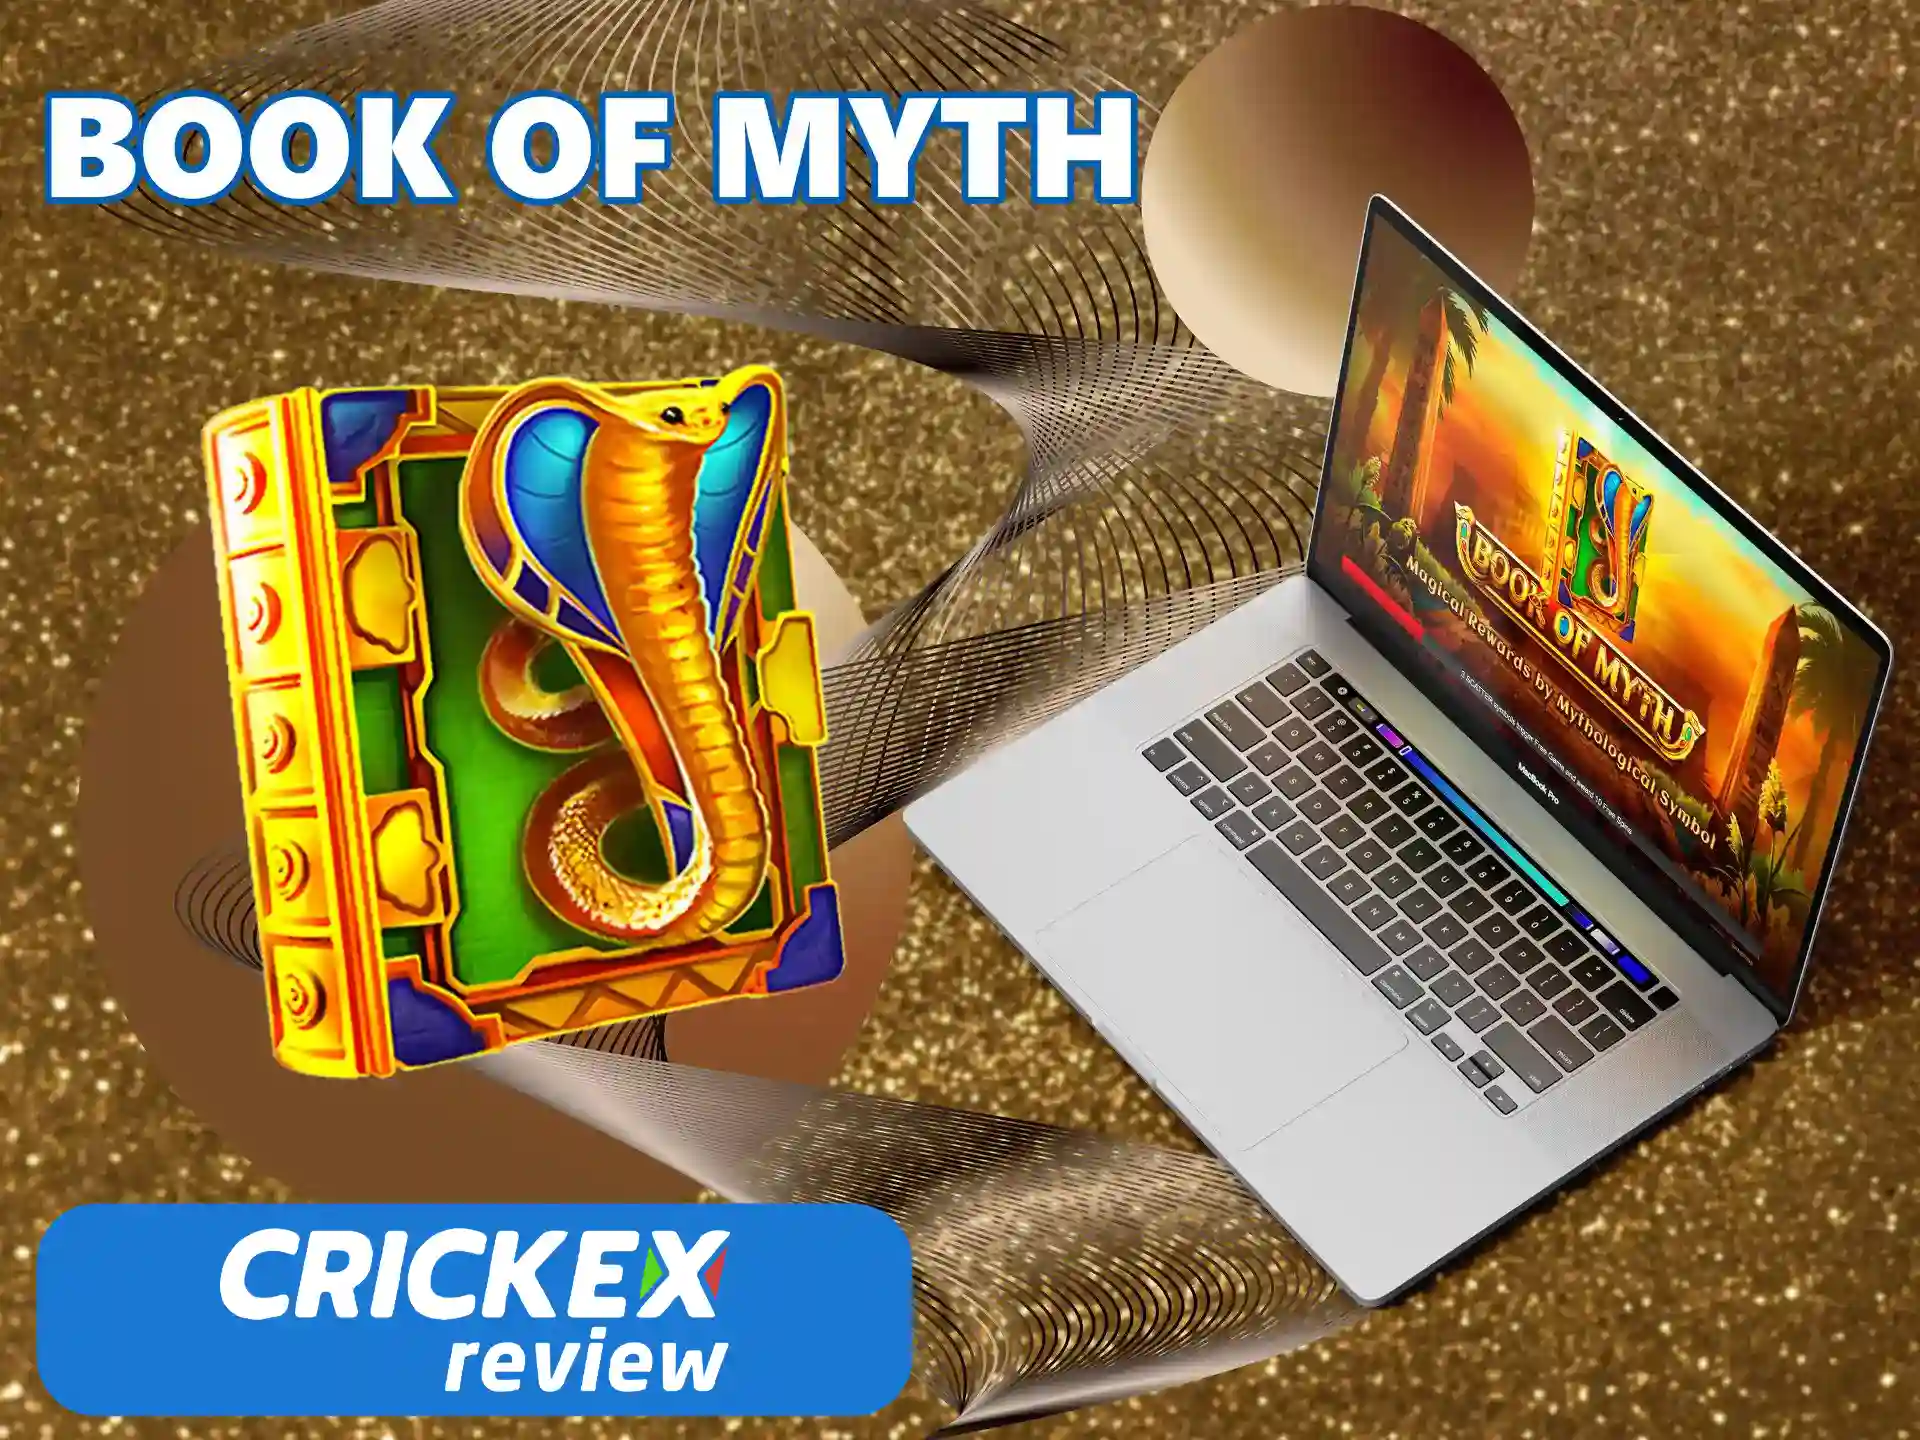 Slot machines from supplier Spadegaming will allow players from Bangladesh to win big at Crickex.